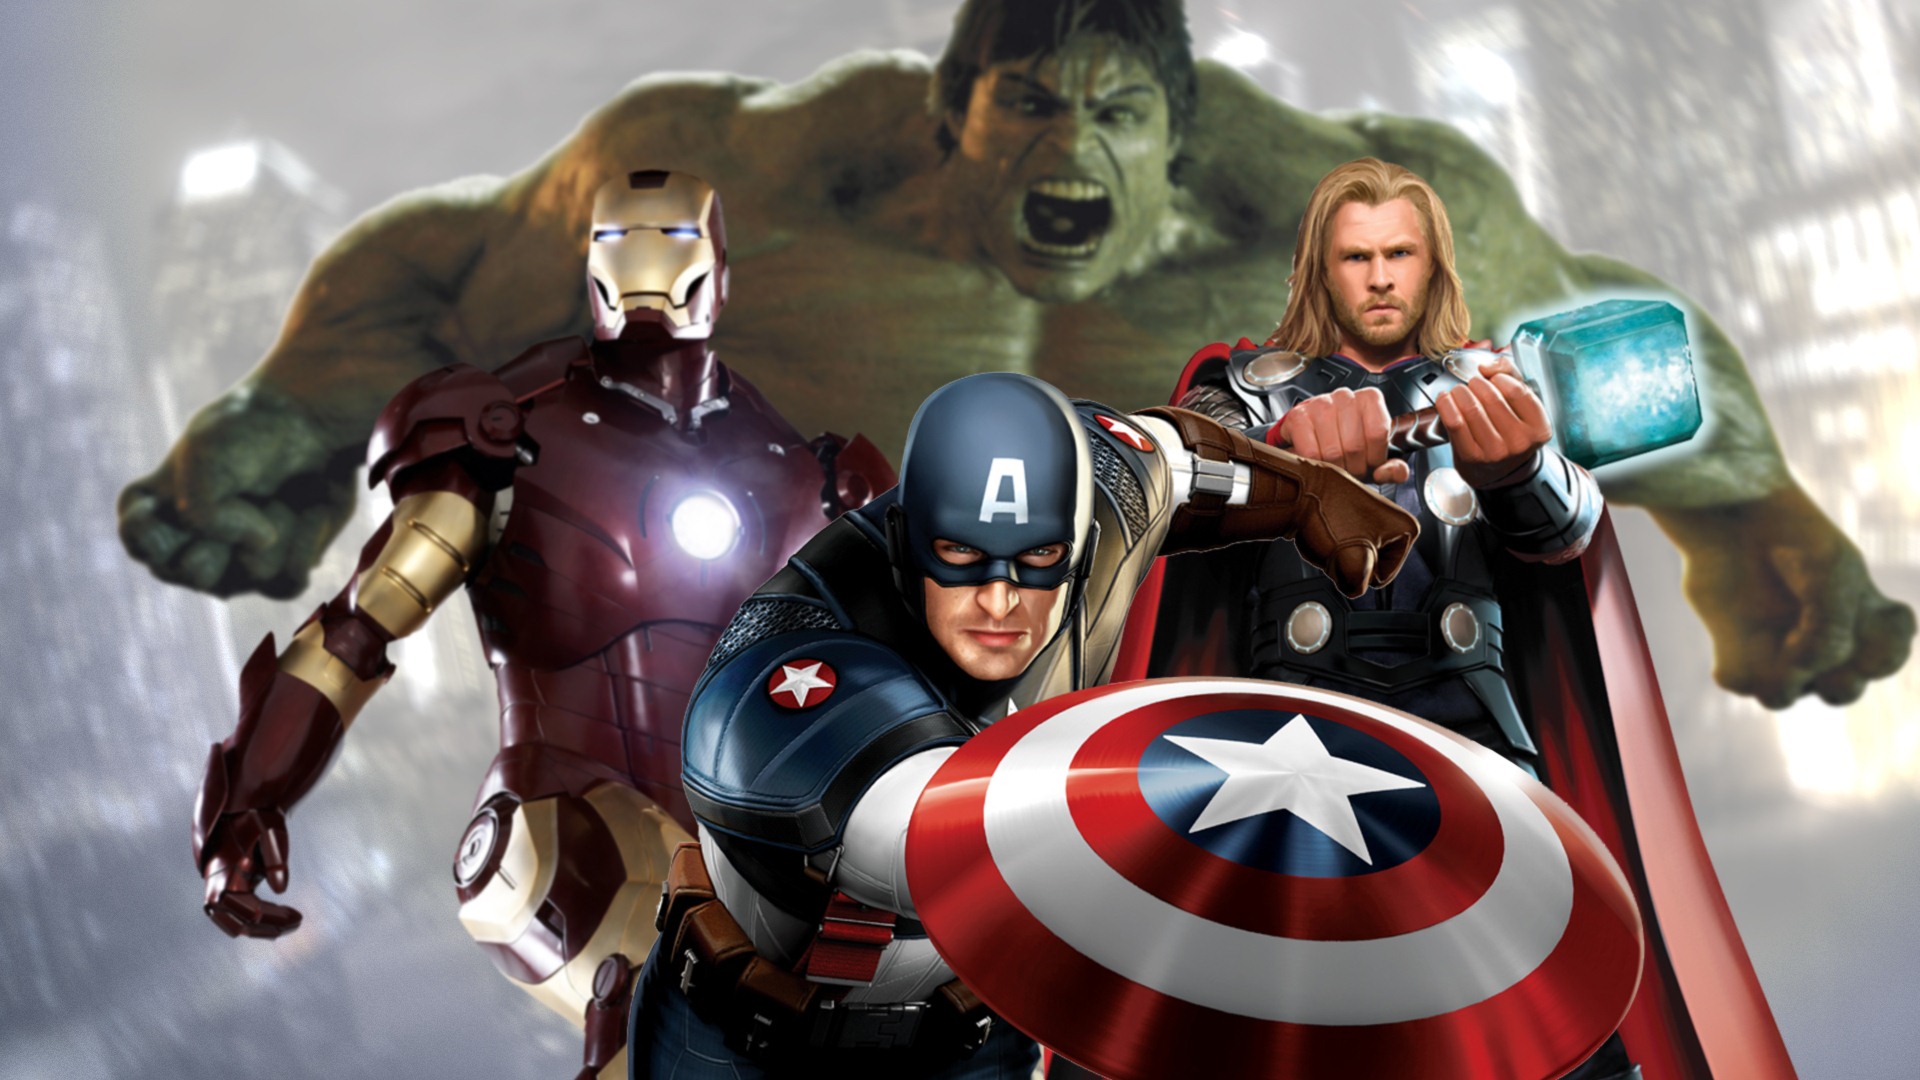 The Avengers 2012 HD wallpapers #2 - 1920x1080